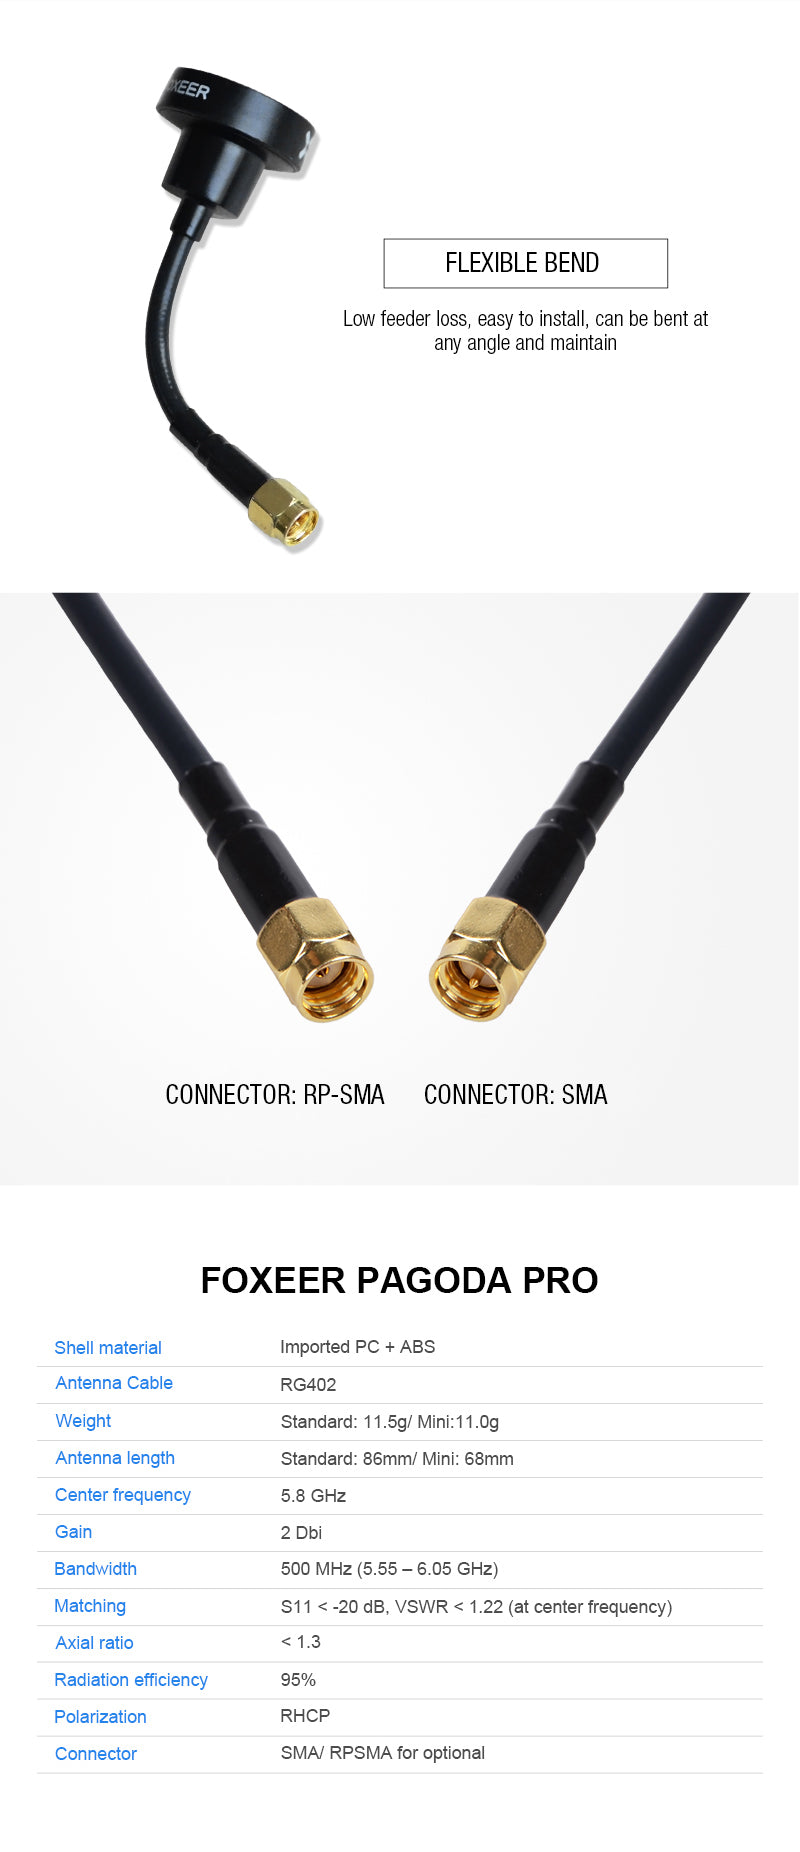 RHCP Foxeer Pagoda Pro Antenna Long for Sale